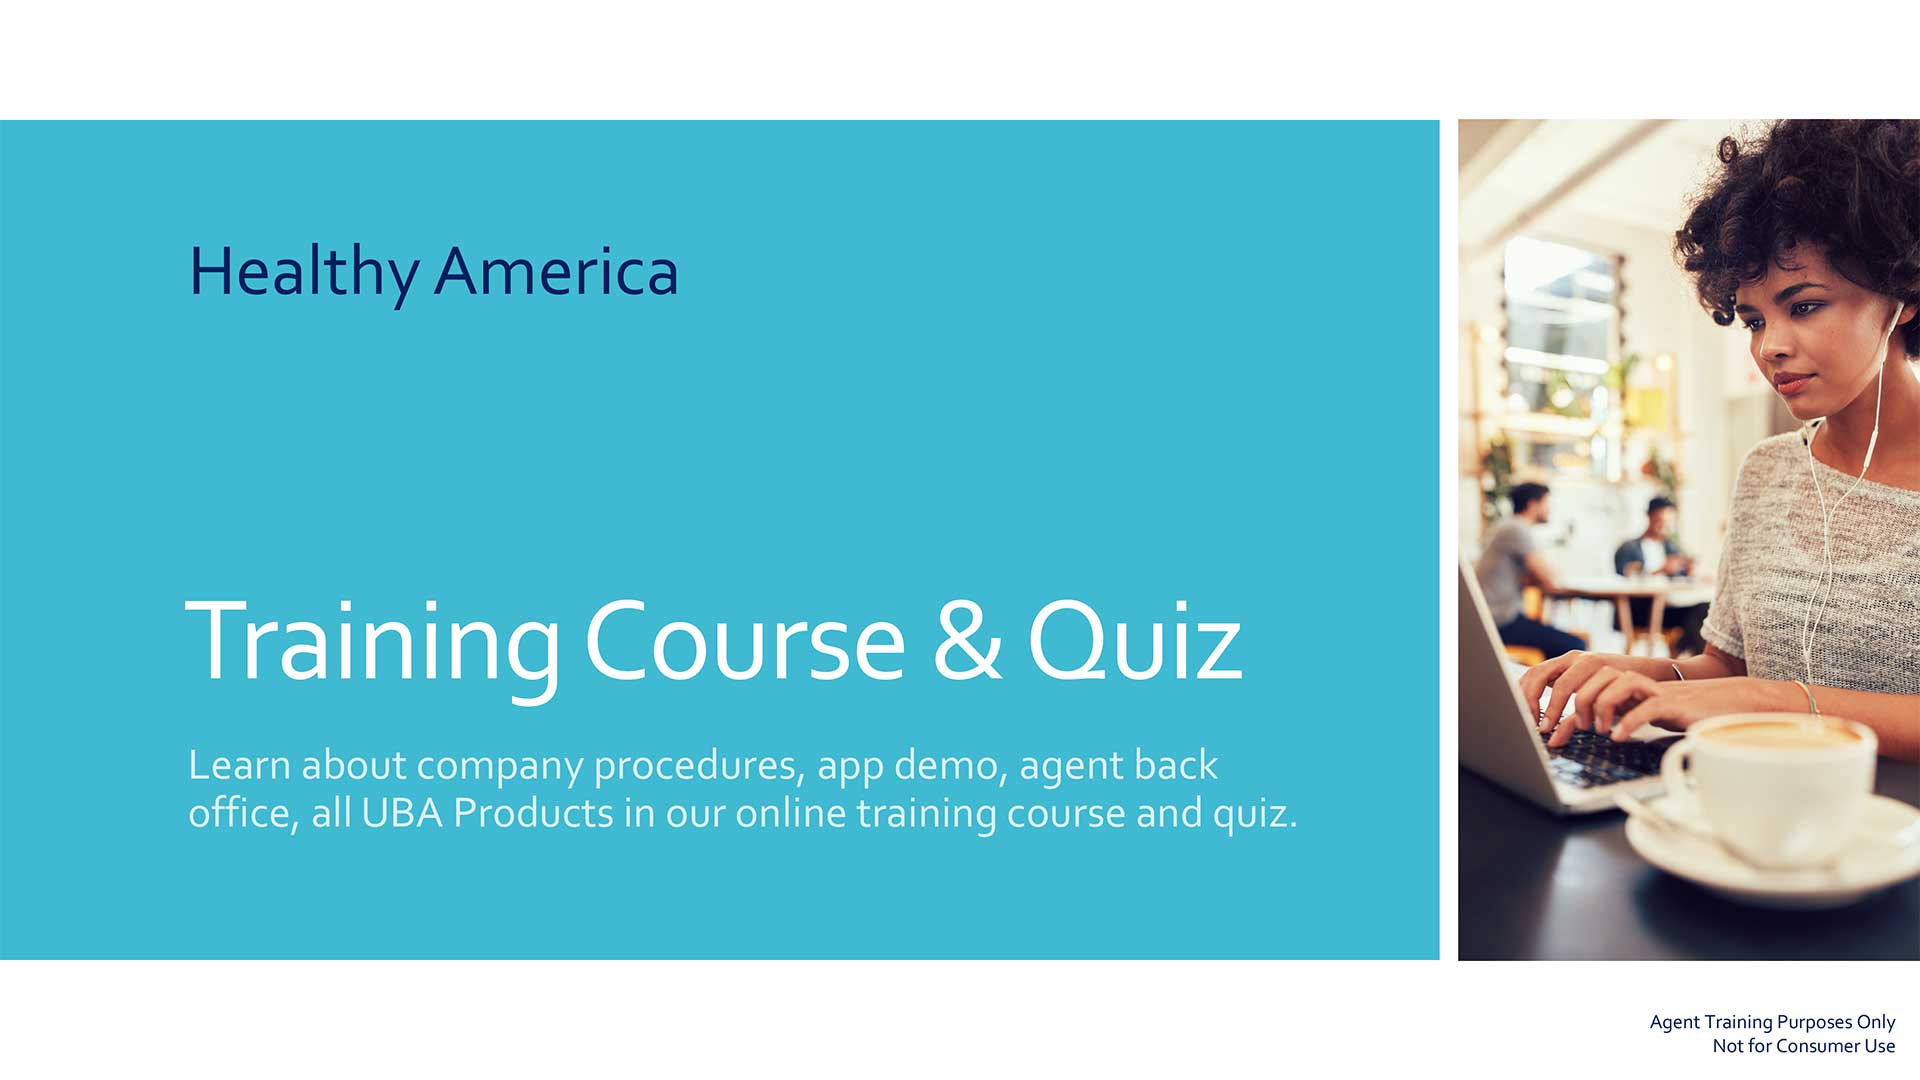 Agent Online Training Course & Quiz for New Agents Selling UBA